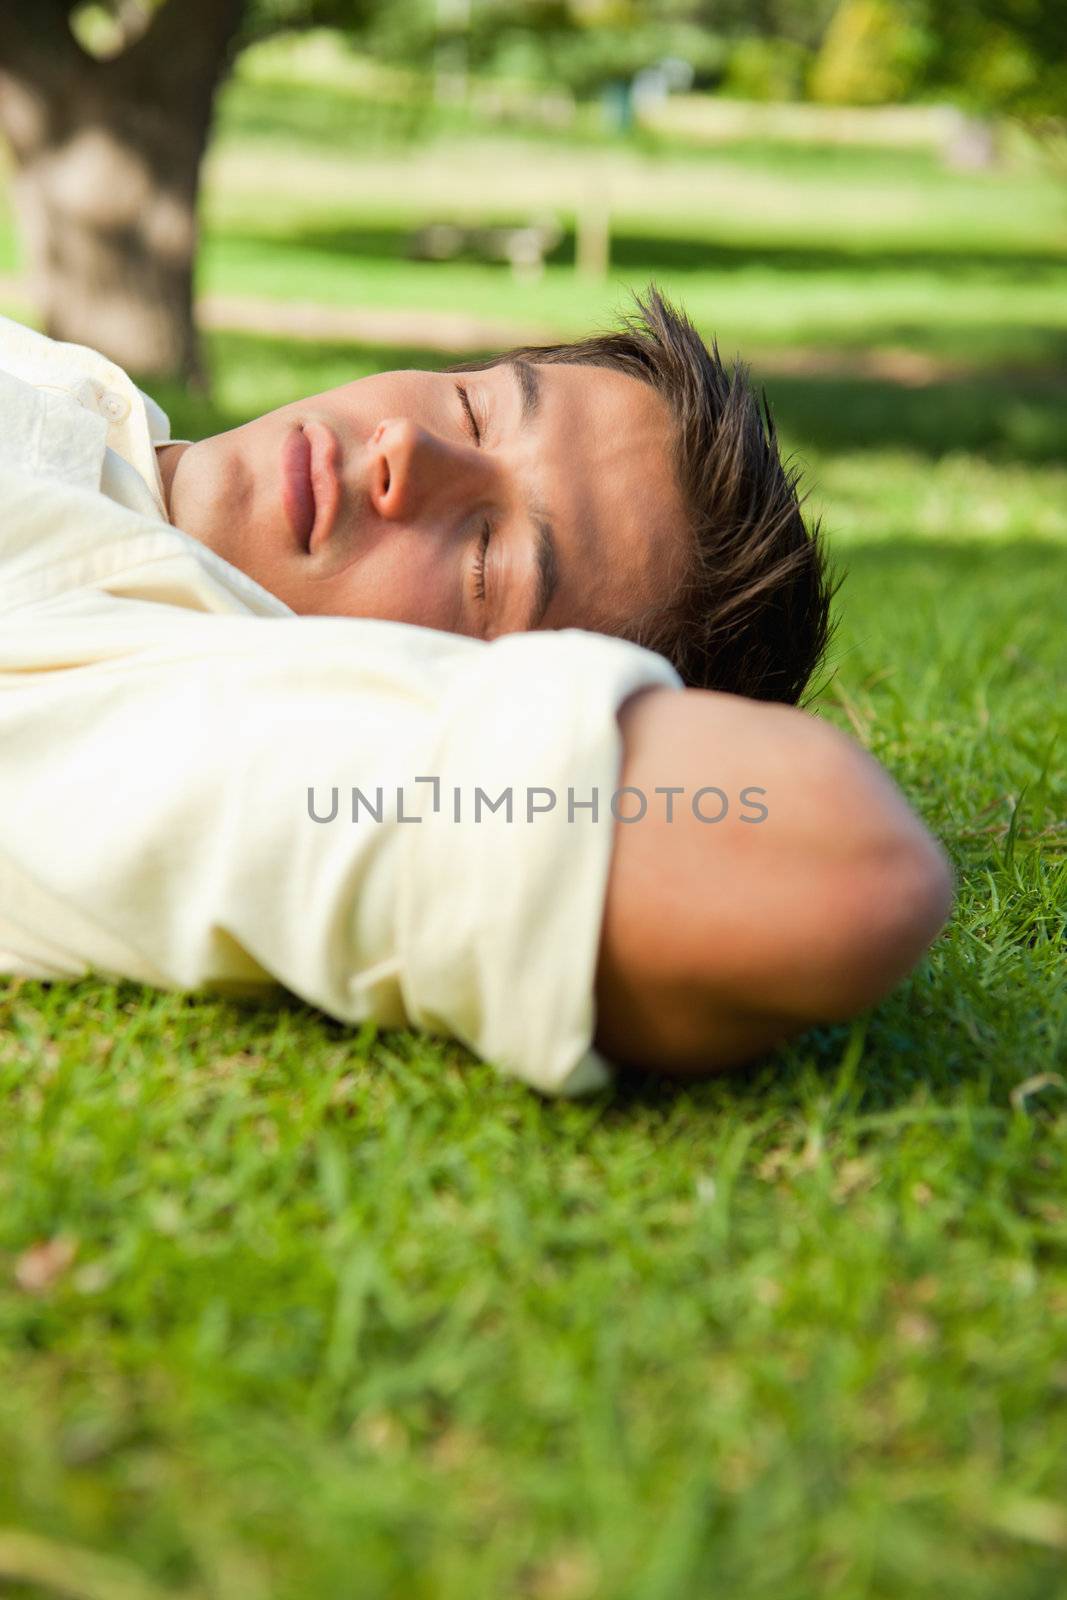 Man lying in grass with his eyes closed and his hands resting underneath the side of his head